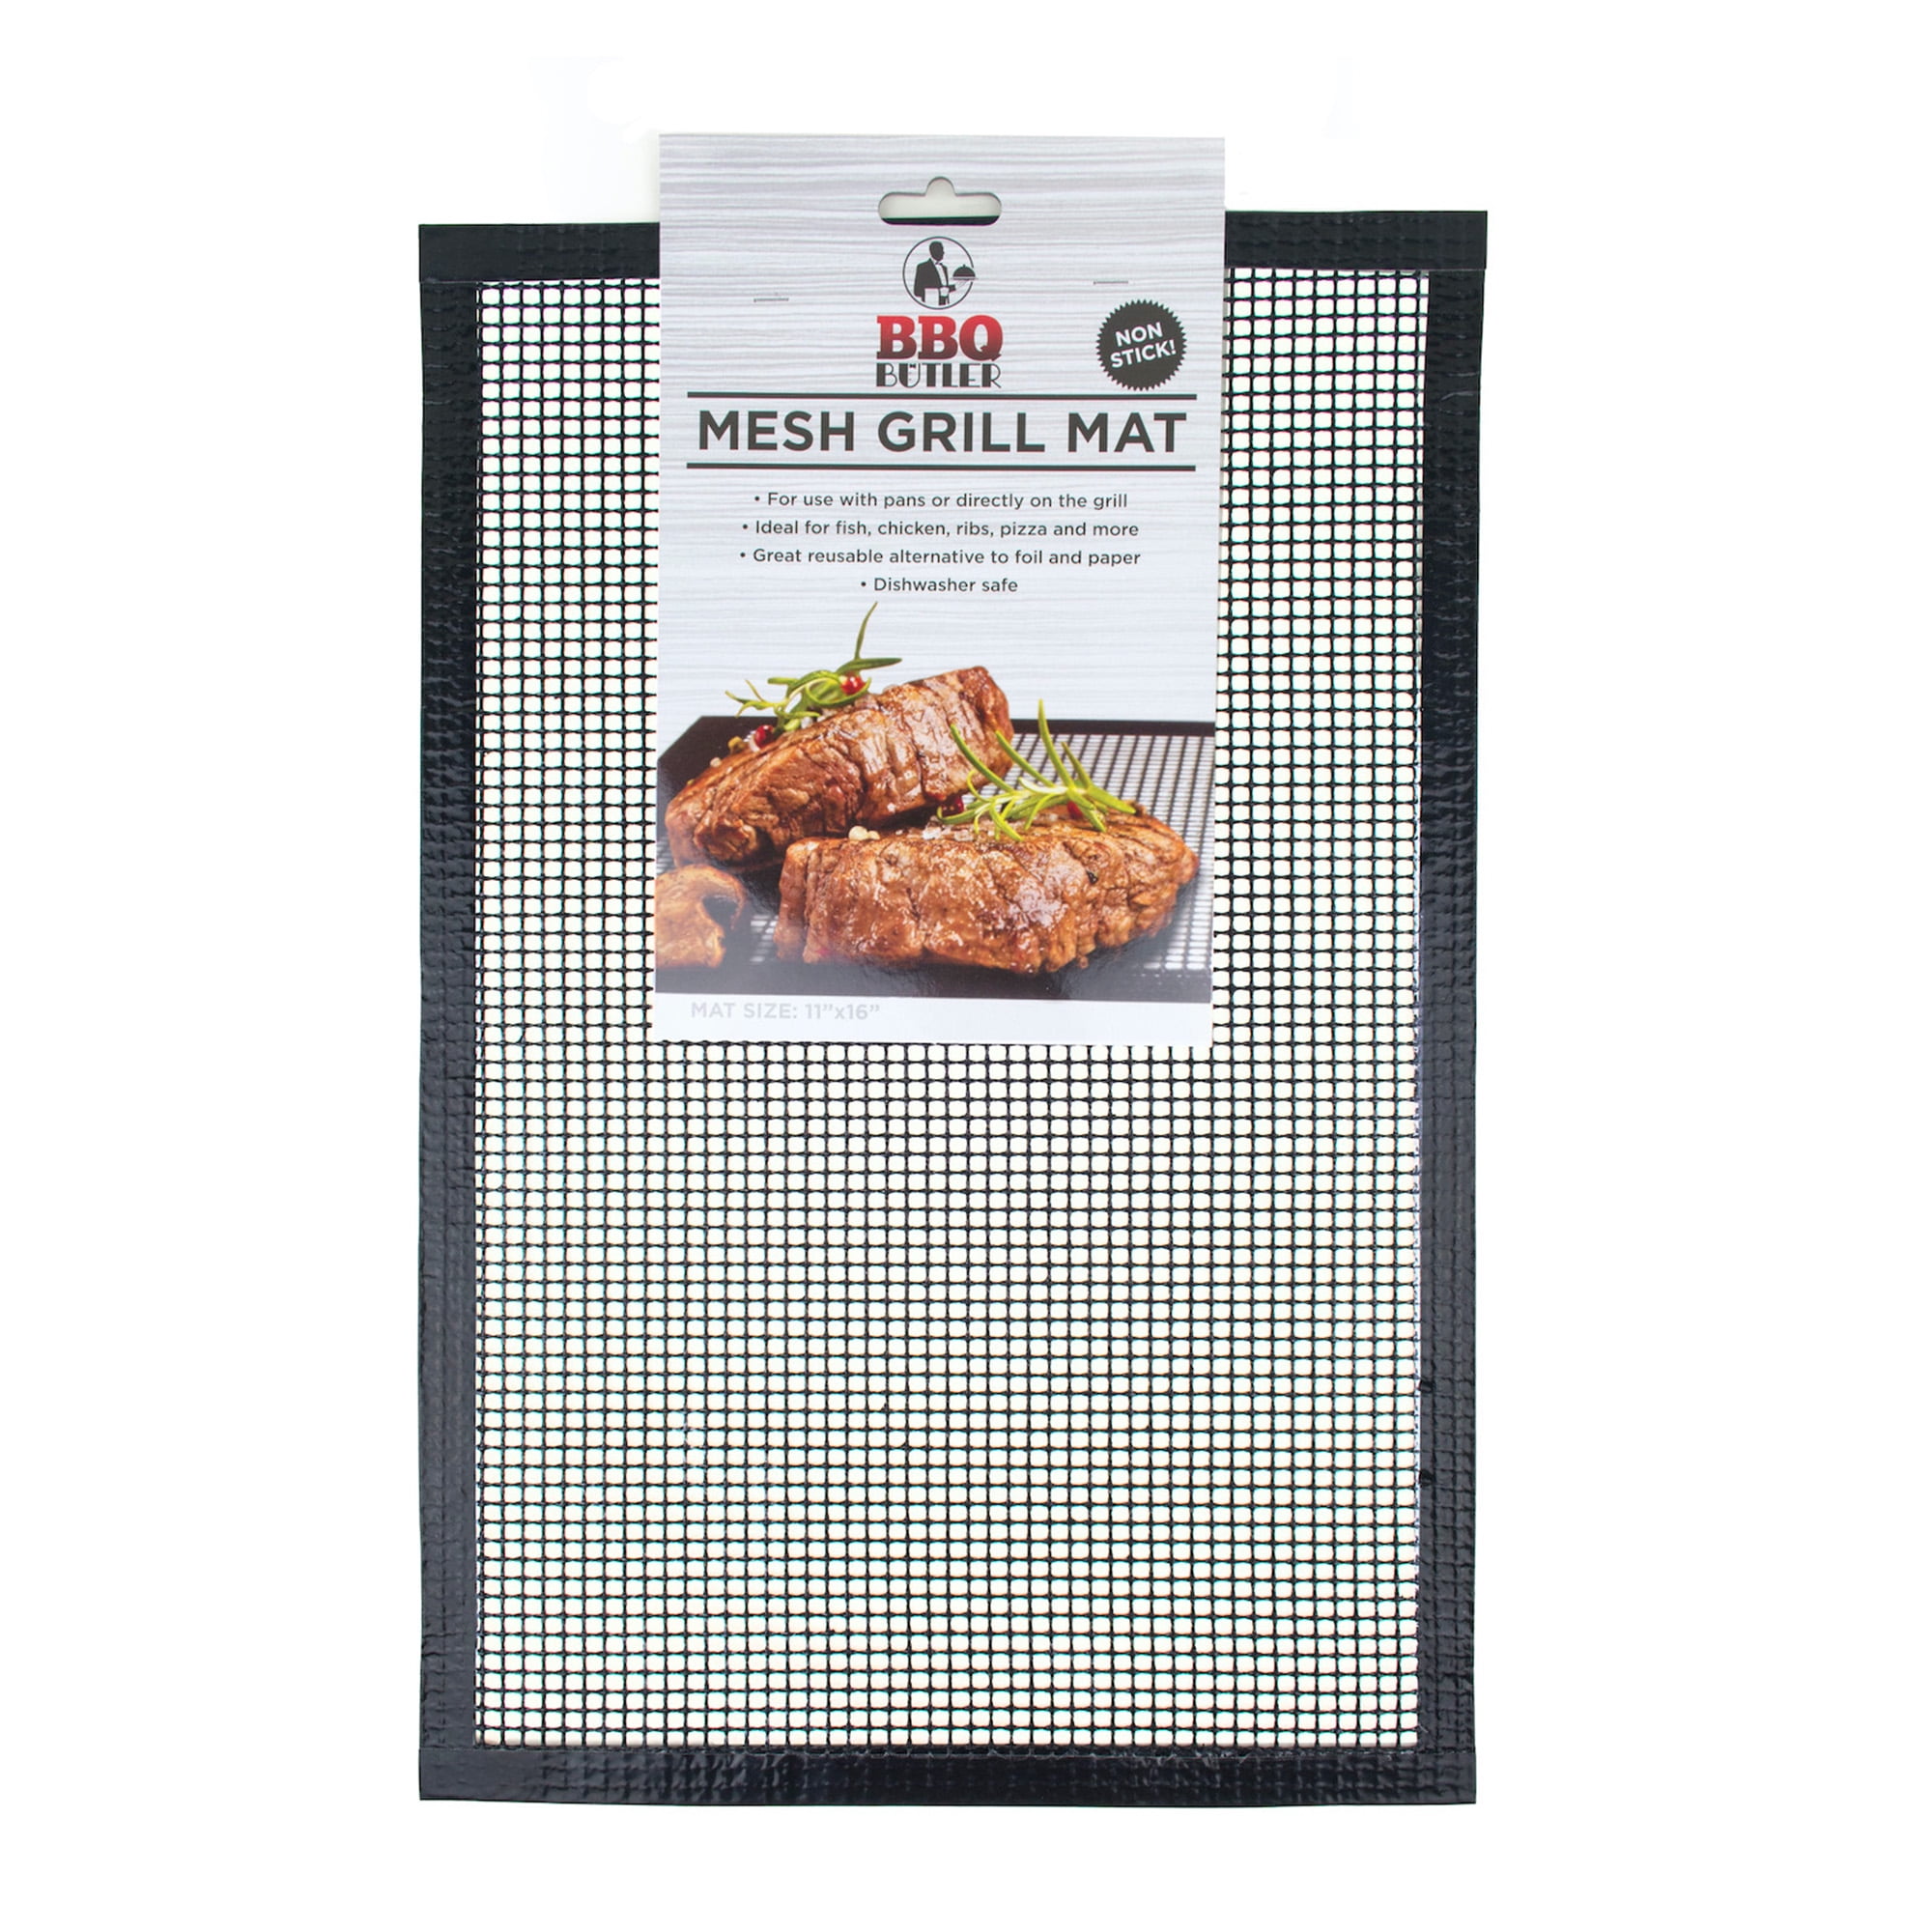 Reusable Non-stick Make Grilling Easy BBQ! Details about   BBQ GRILL MAT set of 2/4/6 sheets 